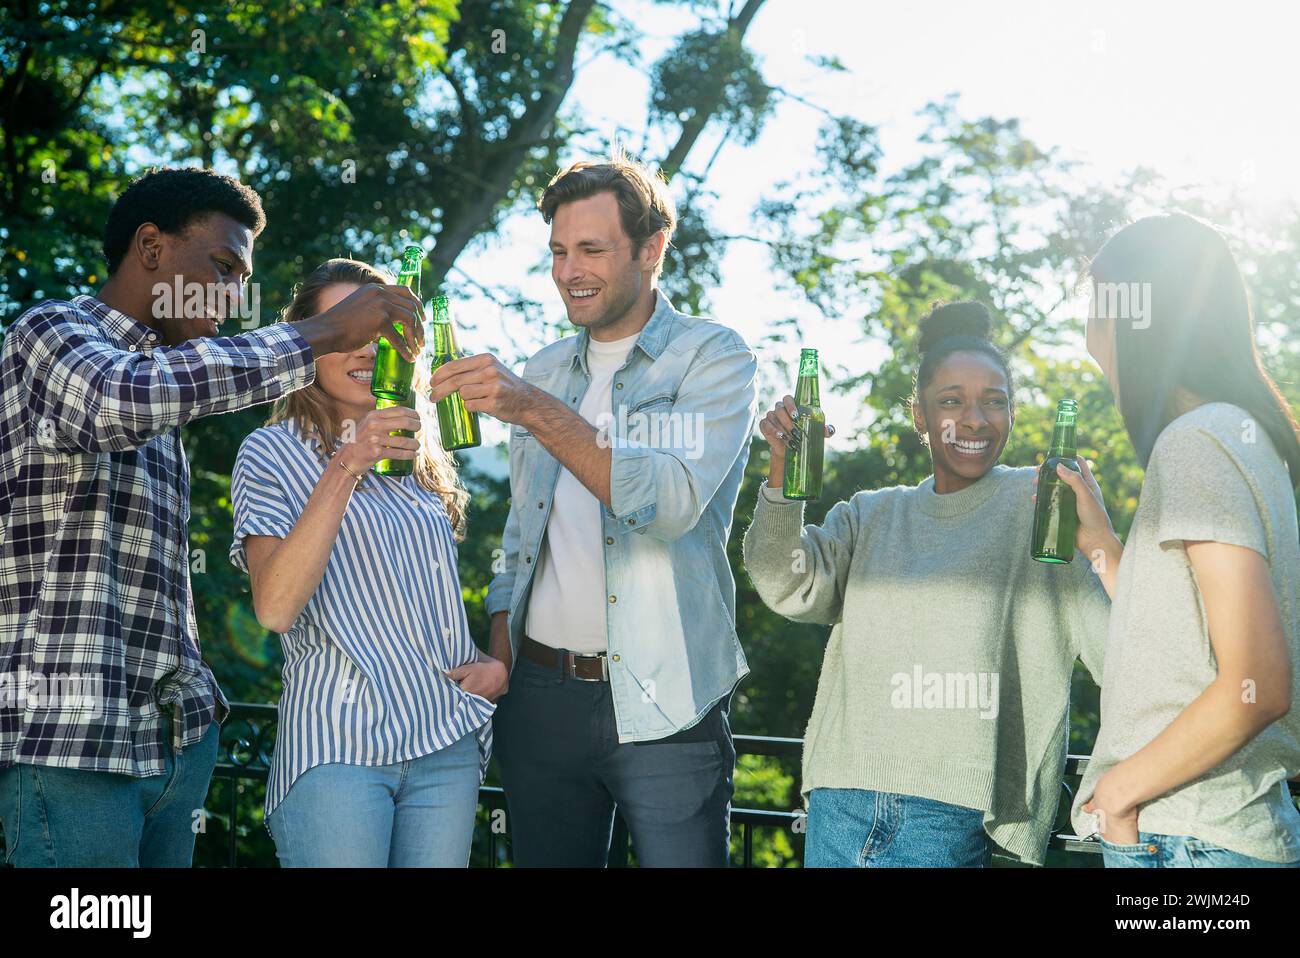 Adult man celebrating with friends at rooftop toasting with beer bottles Stock Photo